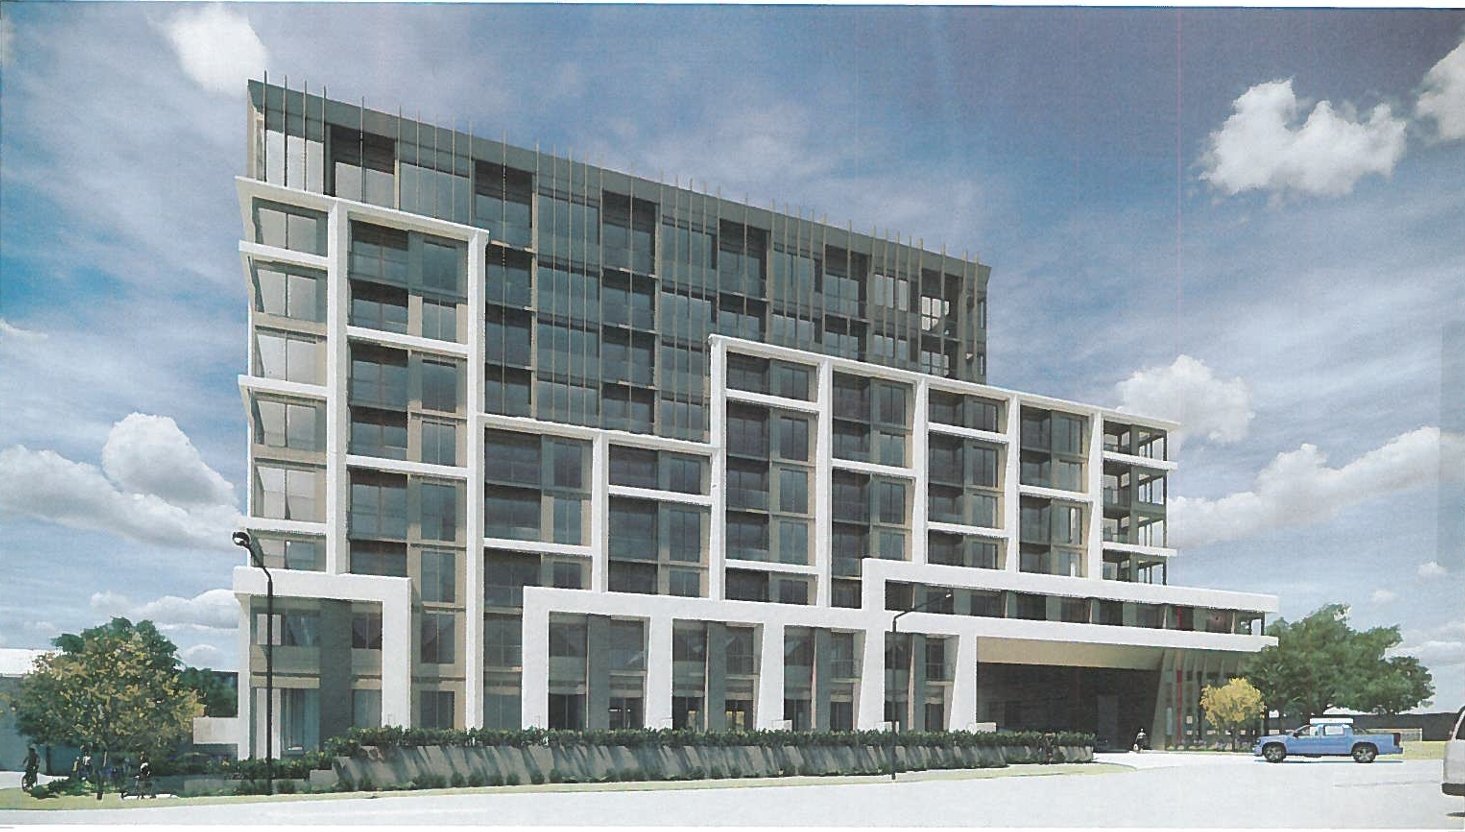 The Unionville Condos, Markham, designed by Baron Nelson Architects for inCAN Developments